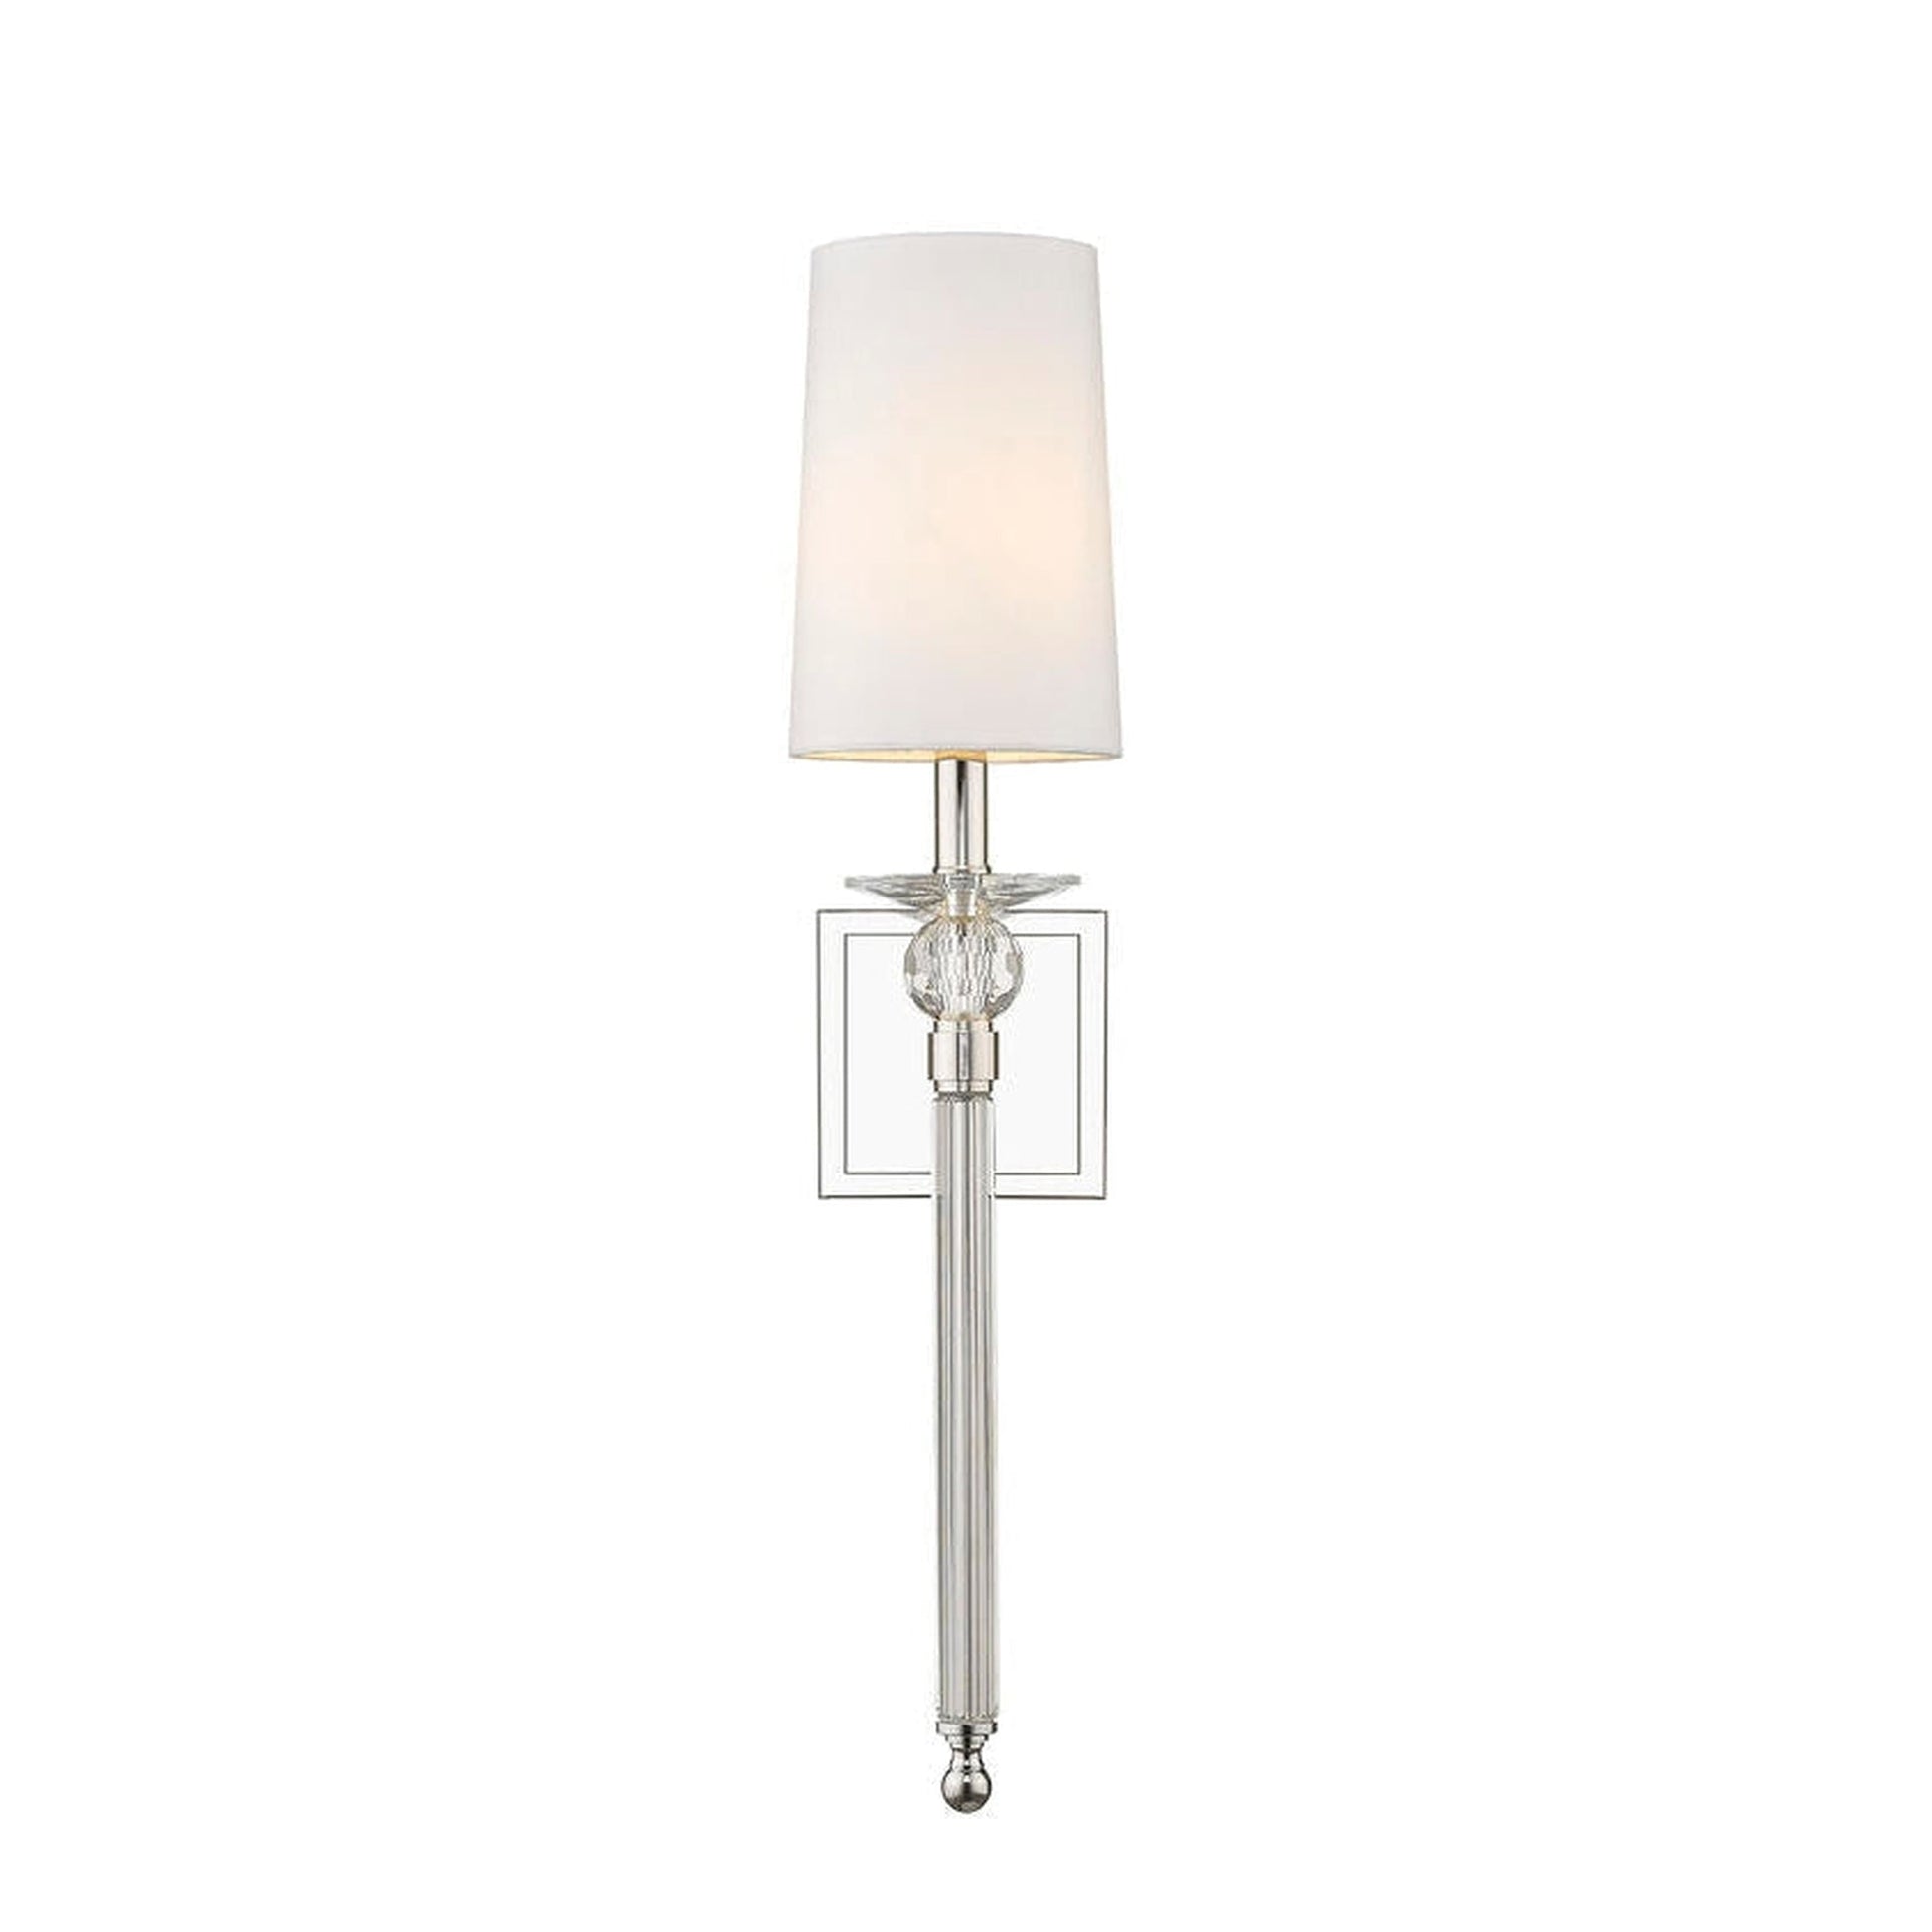 Z-Lite Ava 6" 1-Light Polished Nickel Wall Sconce With White Fabric Shade